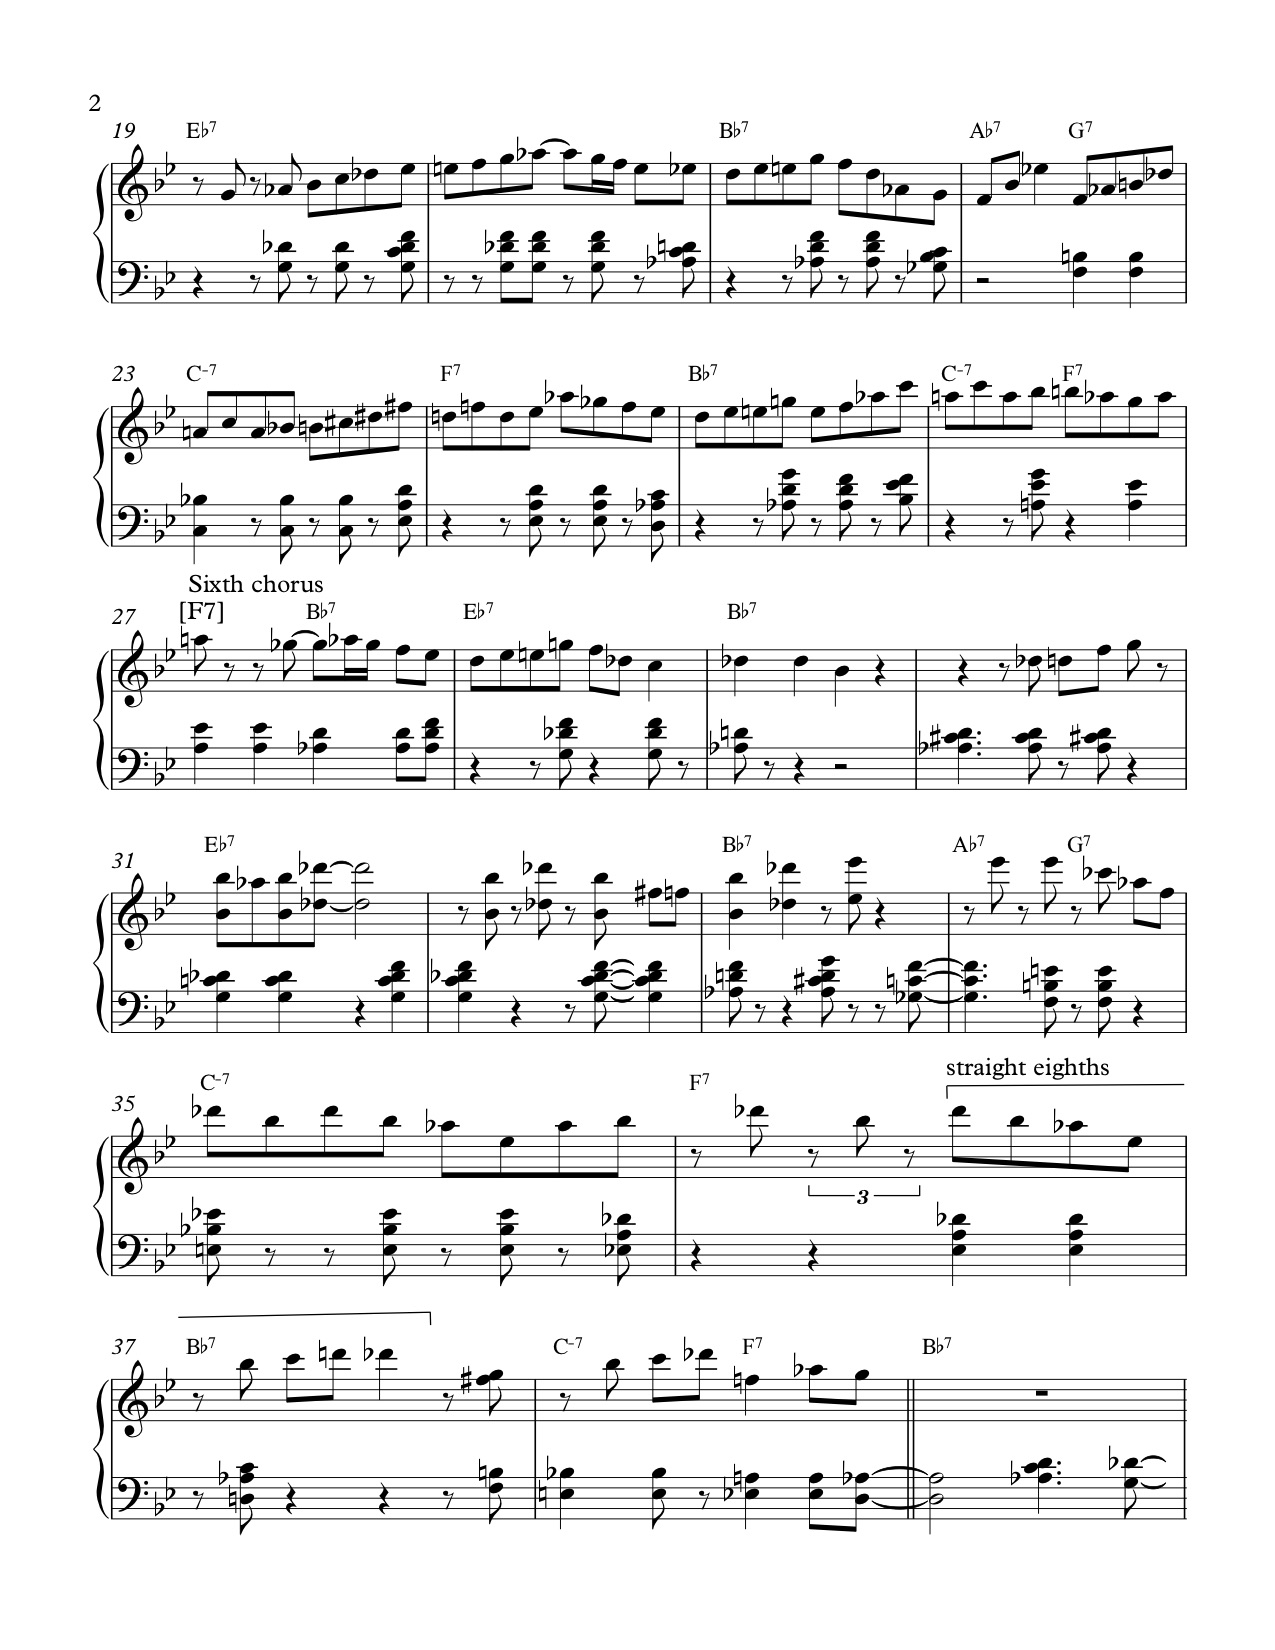 Alice: Madness Returns Unreleased OST - Mystery Ambiance (Celeste) (Chapter  3 Intro) Sheet music for Piano (Solo)